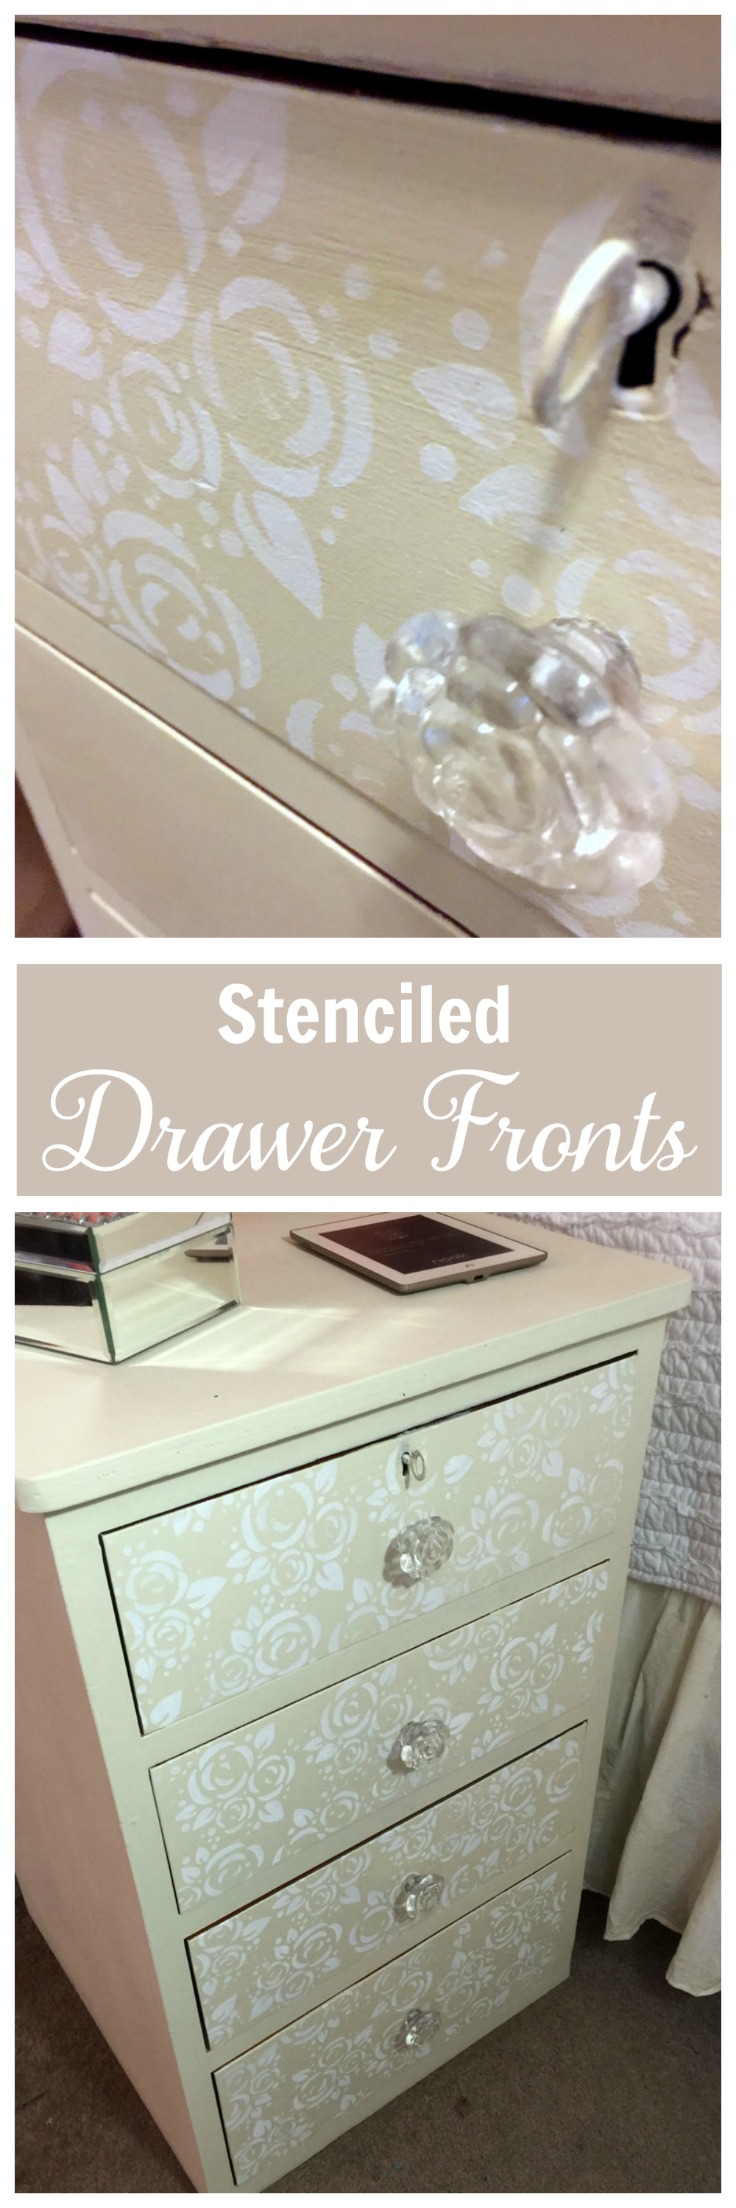 Stenciled Drawer Fronts